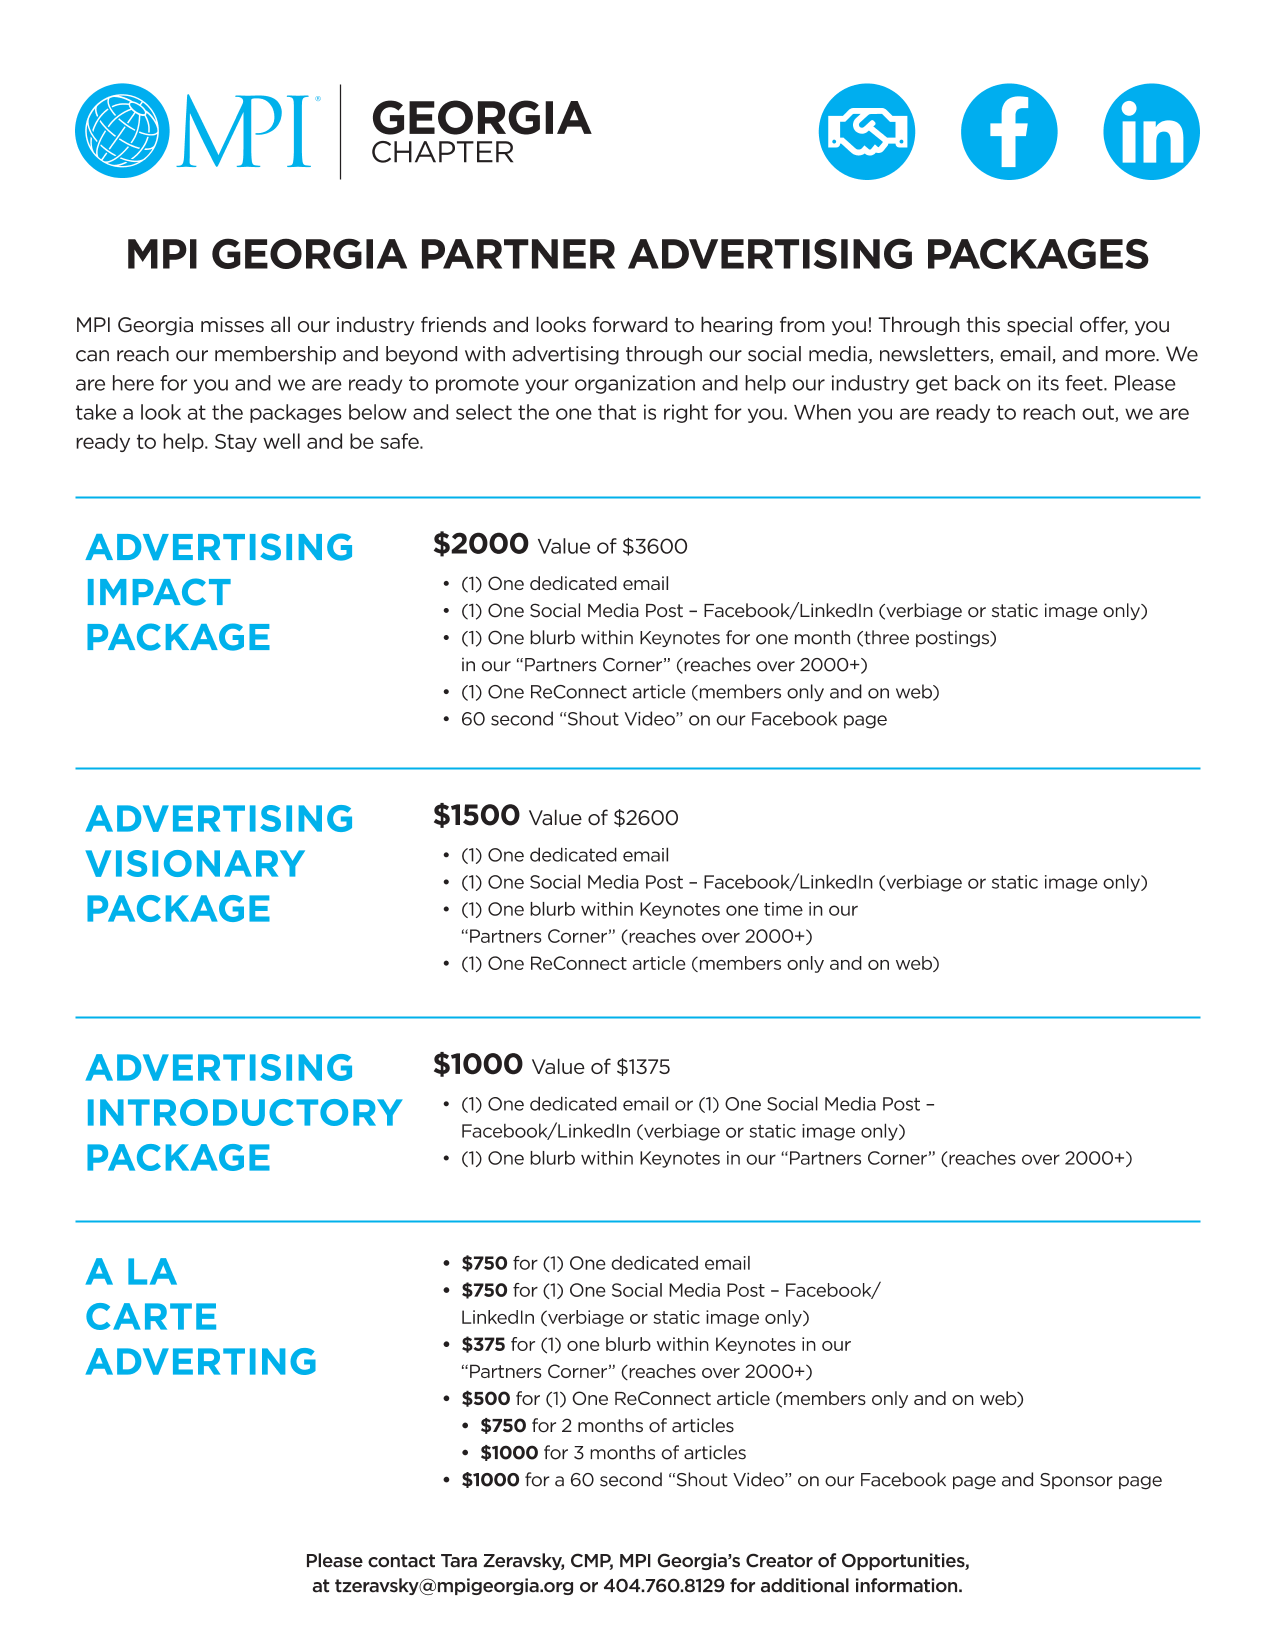 MPI Georgia Advertising Options (as of 9.22.21)_page1